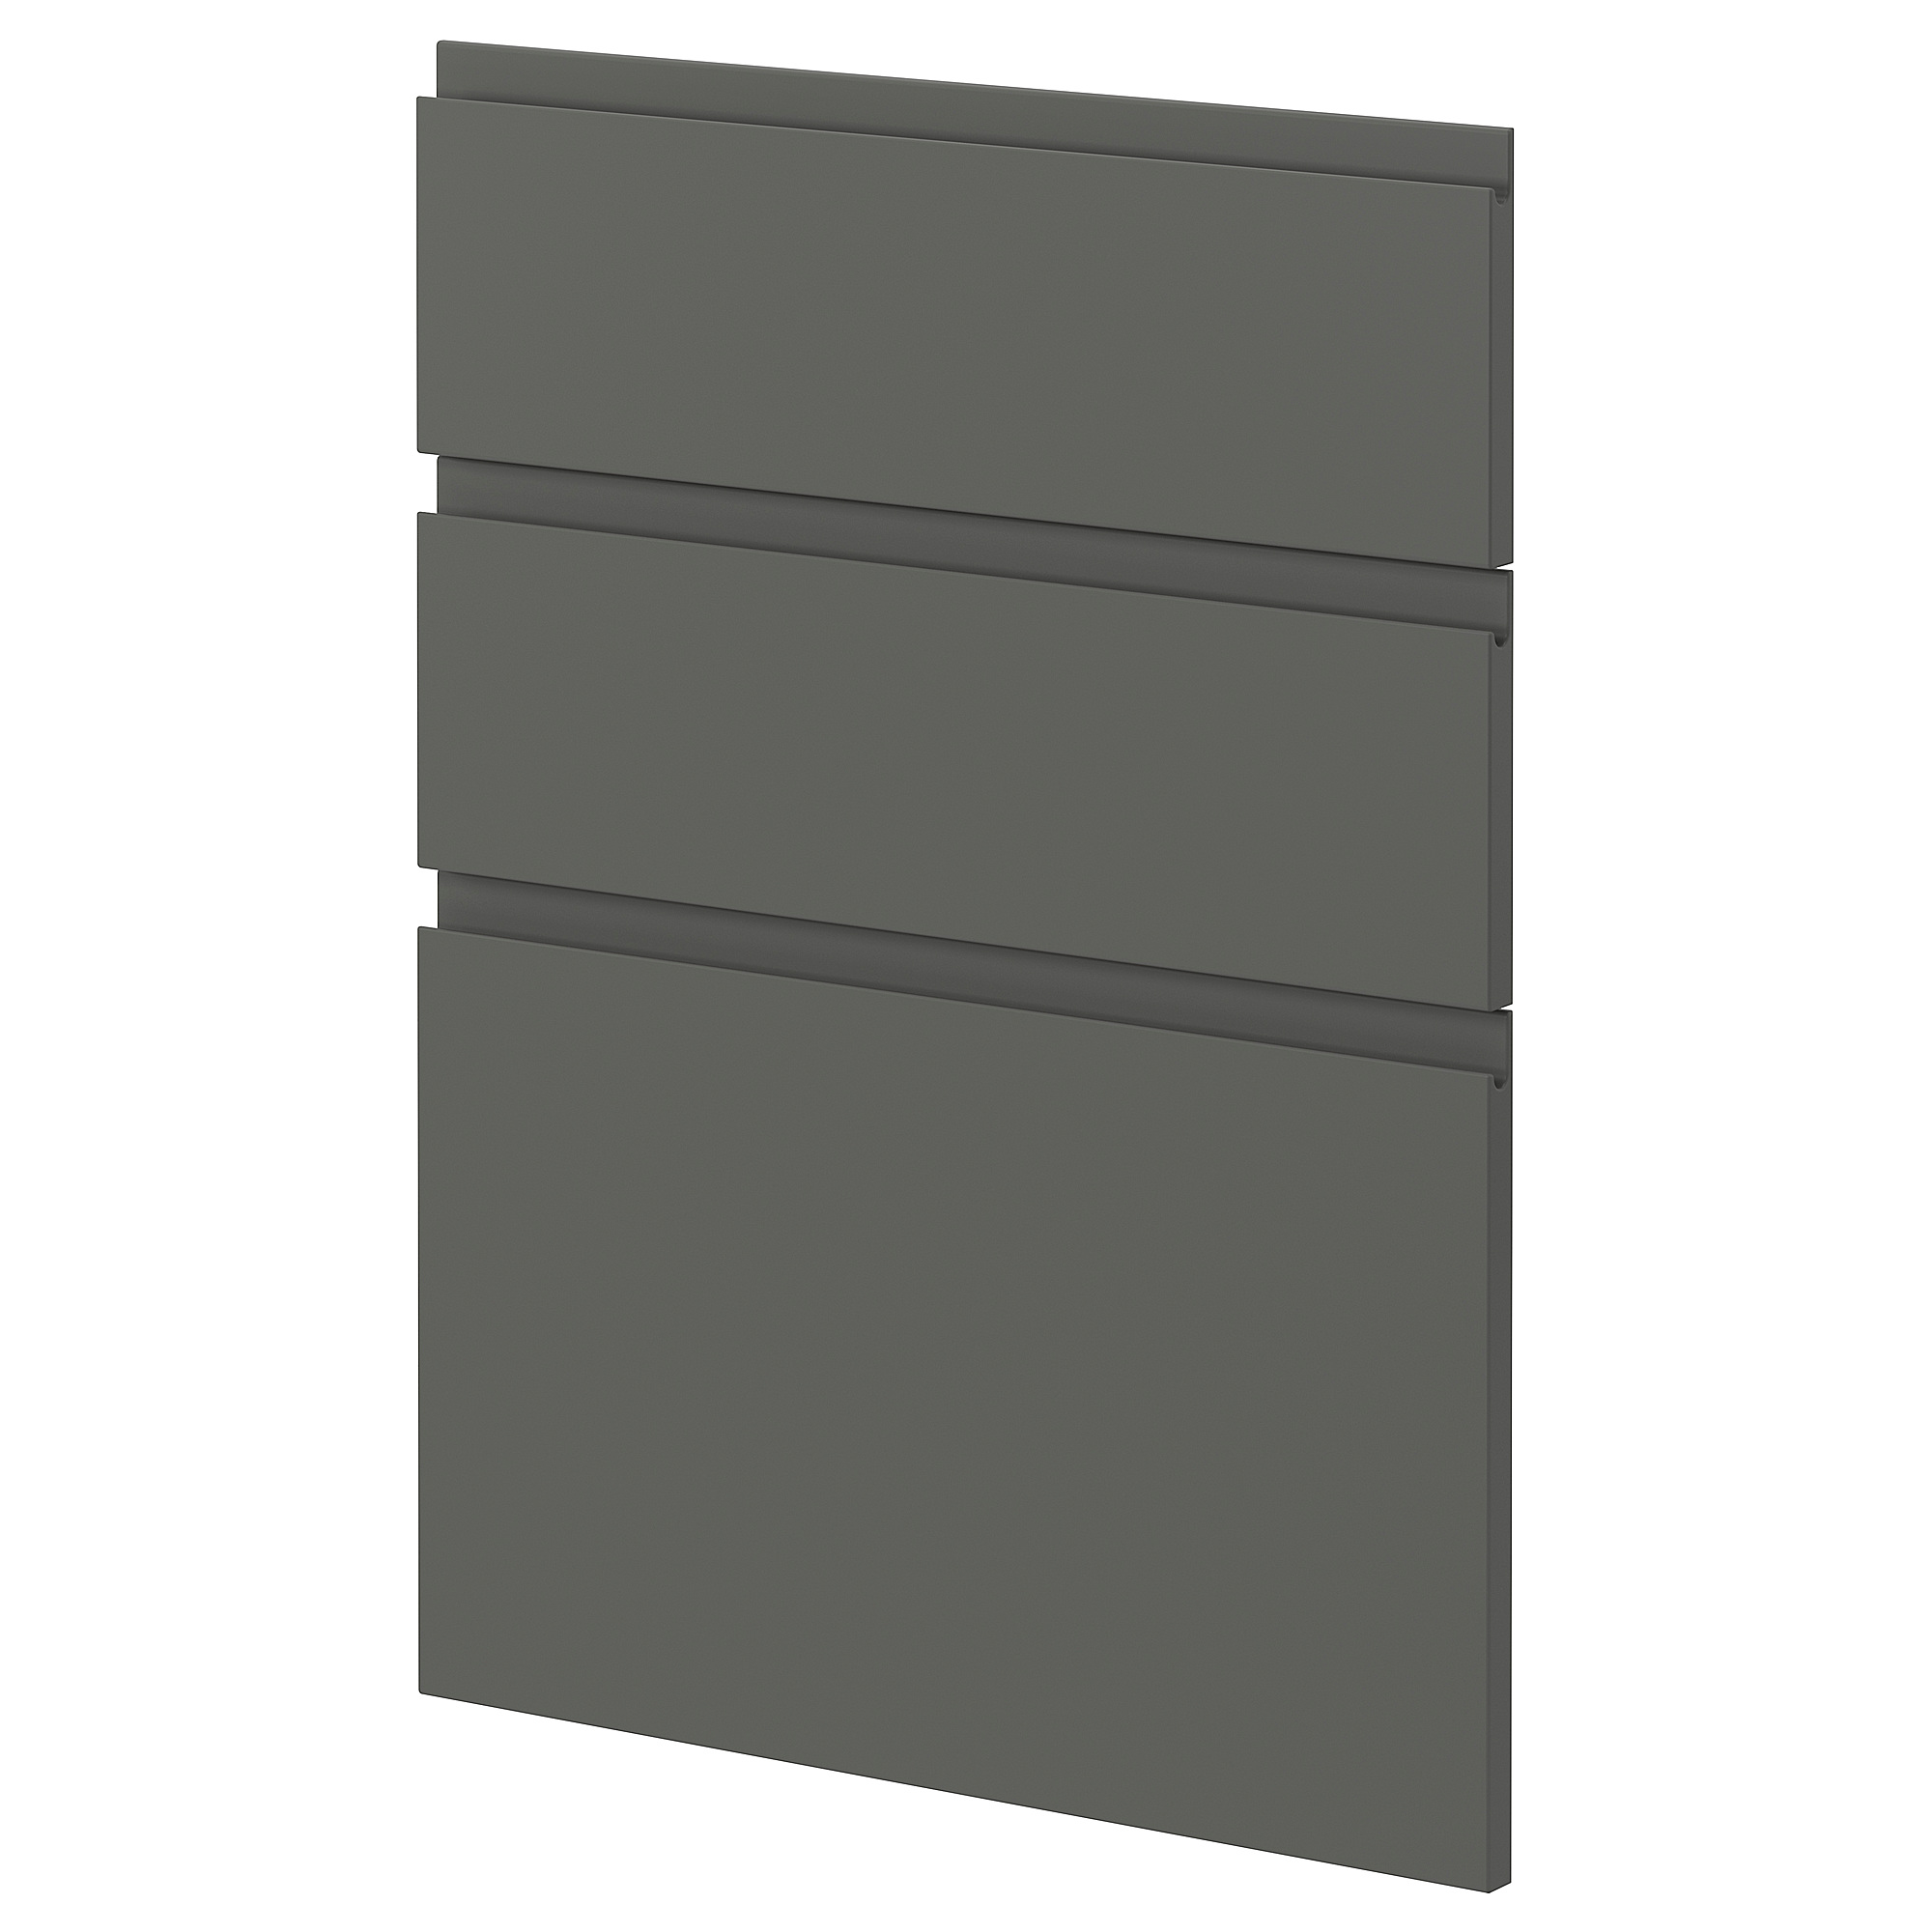 METOD 3 fronts for dishwasher